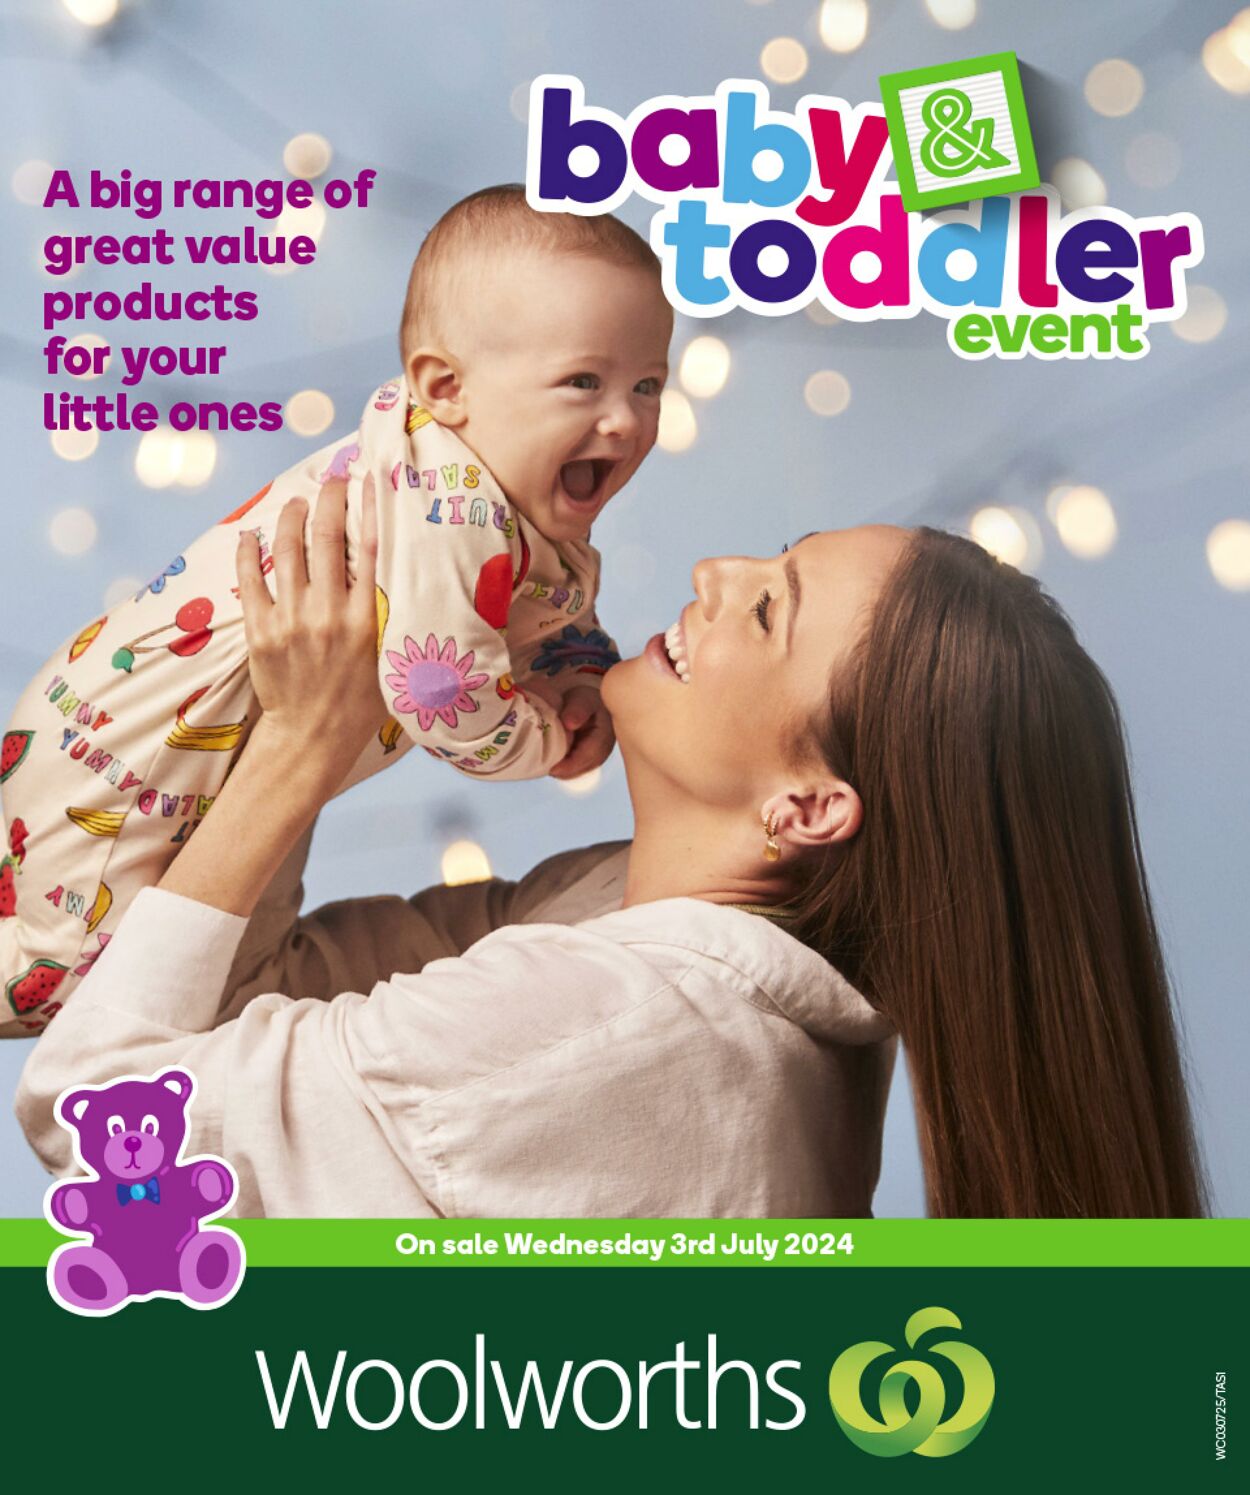 Catalogue Woolworths - Baby Toddler Event Catalogue TAS 3 Jul, 2024 - 9 Jul, 2024